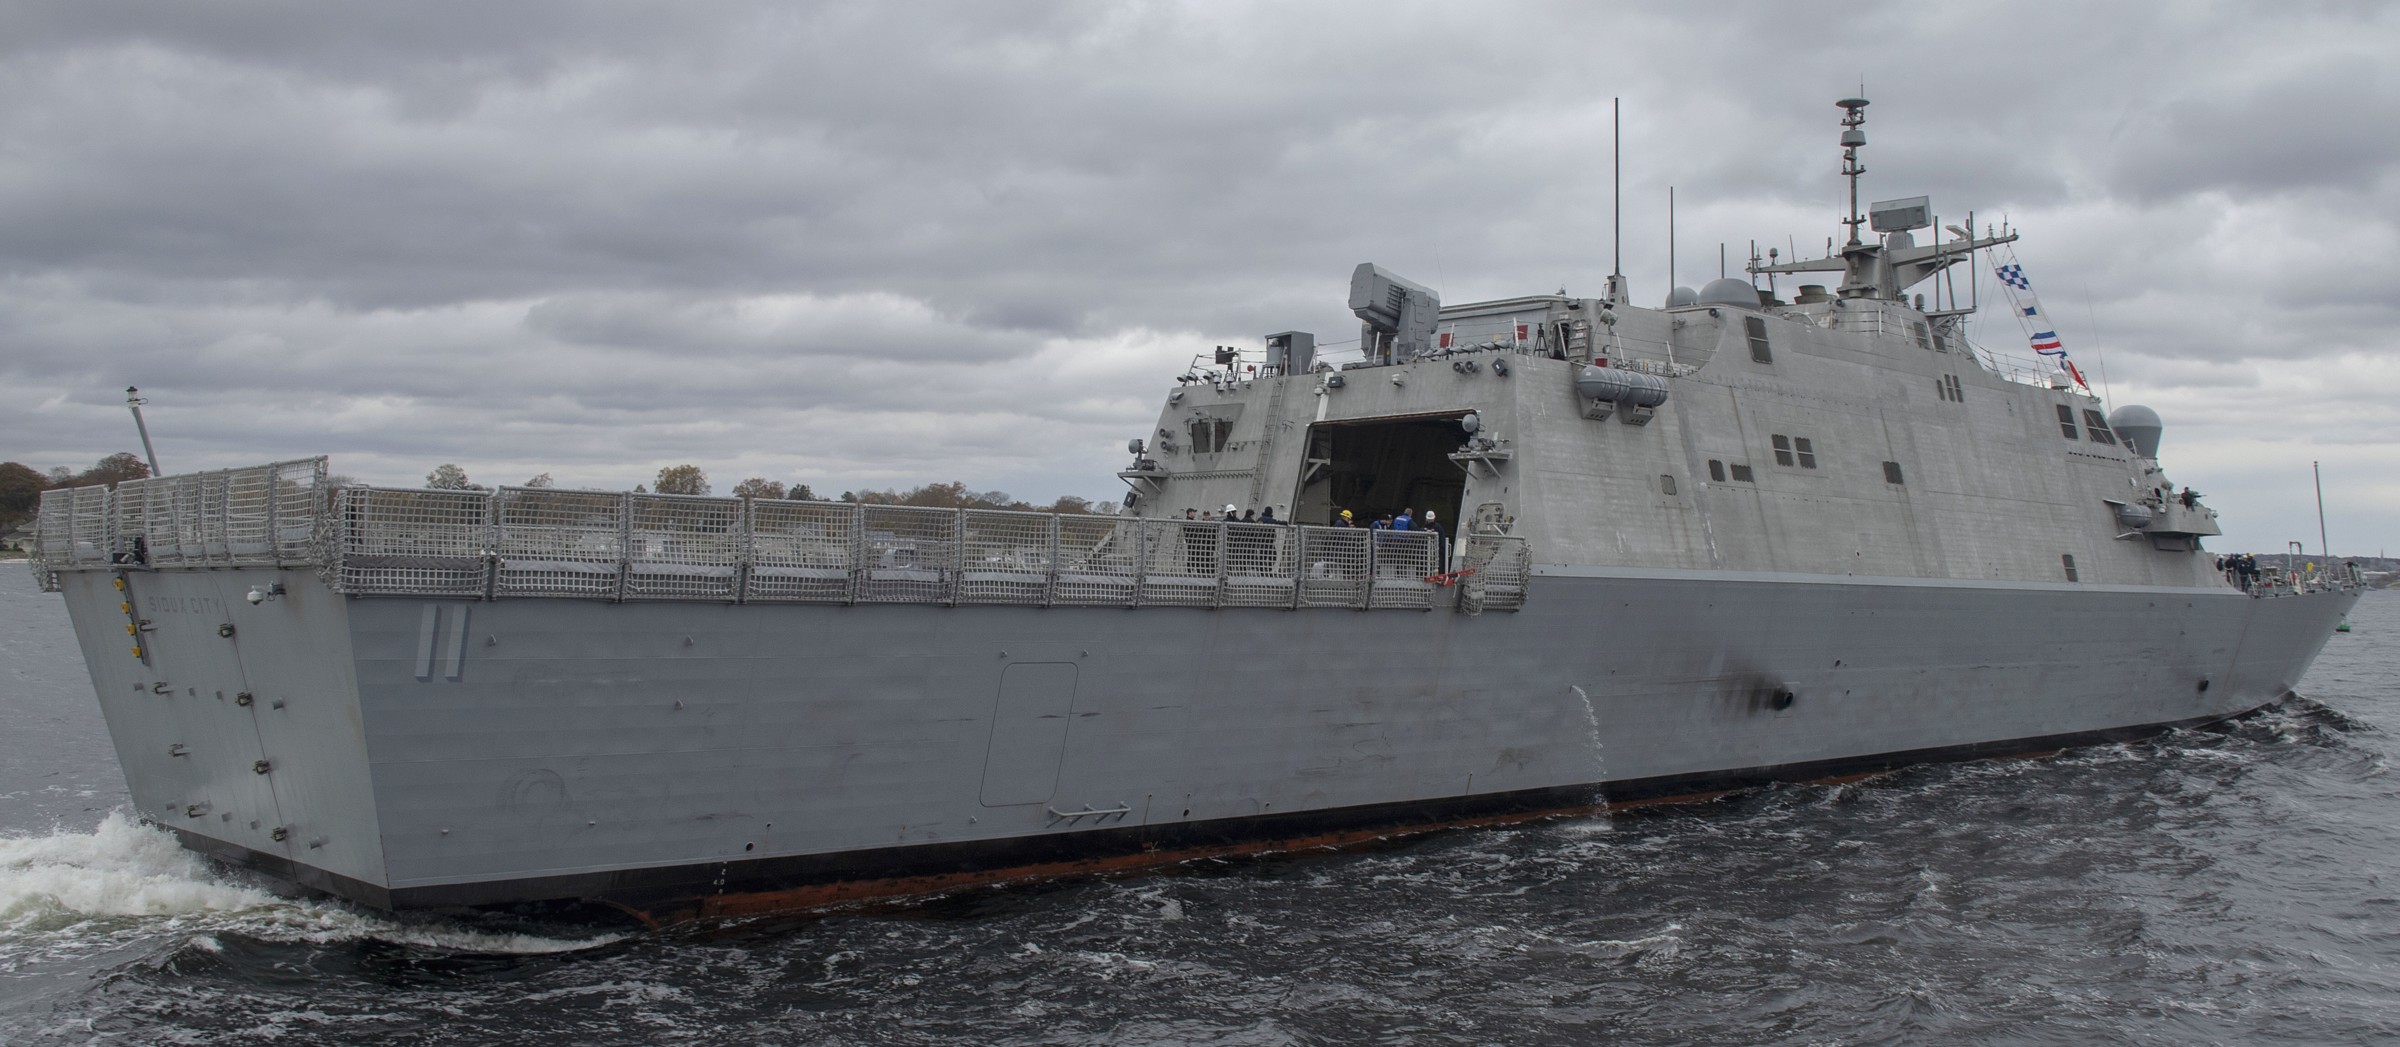 lcs-11 uss sioux city freedom class littoral combat ship us navy 28 subase new london groton